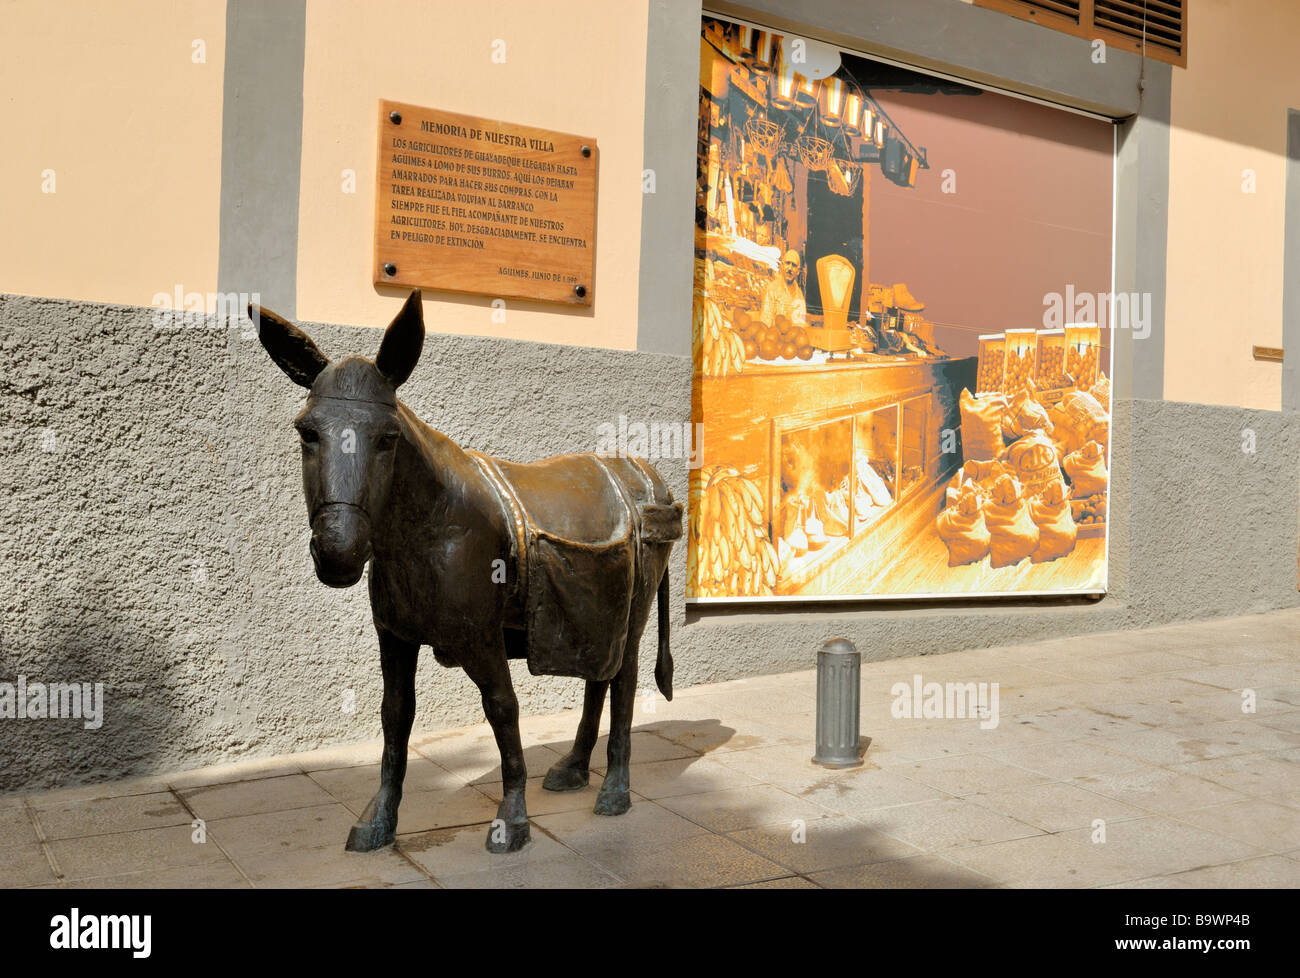 The bronze statue of donkey in Calle el Progreso. Aguimes, Gran Canaria, Canary Islands, Spain, Europe. Stock Photo